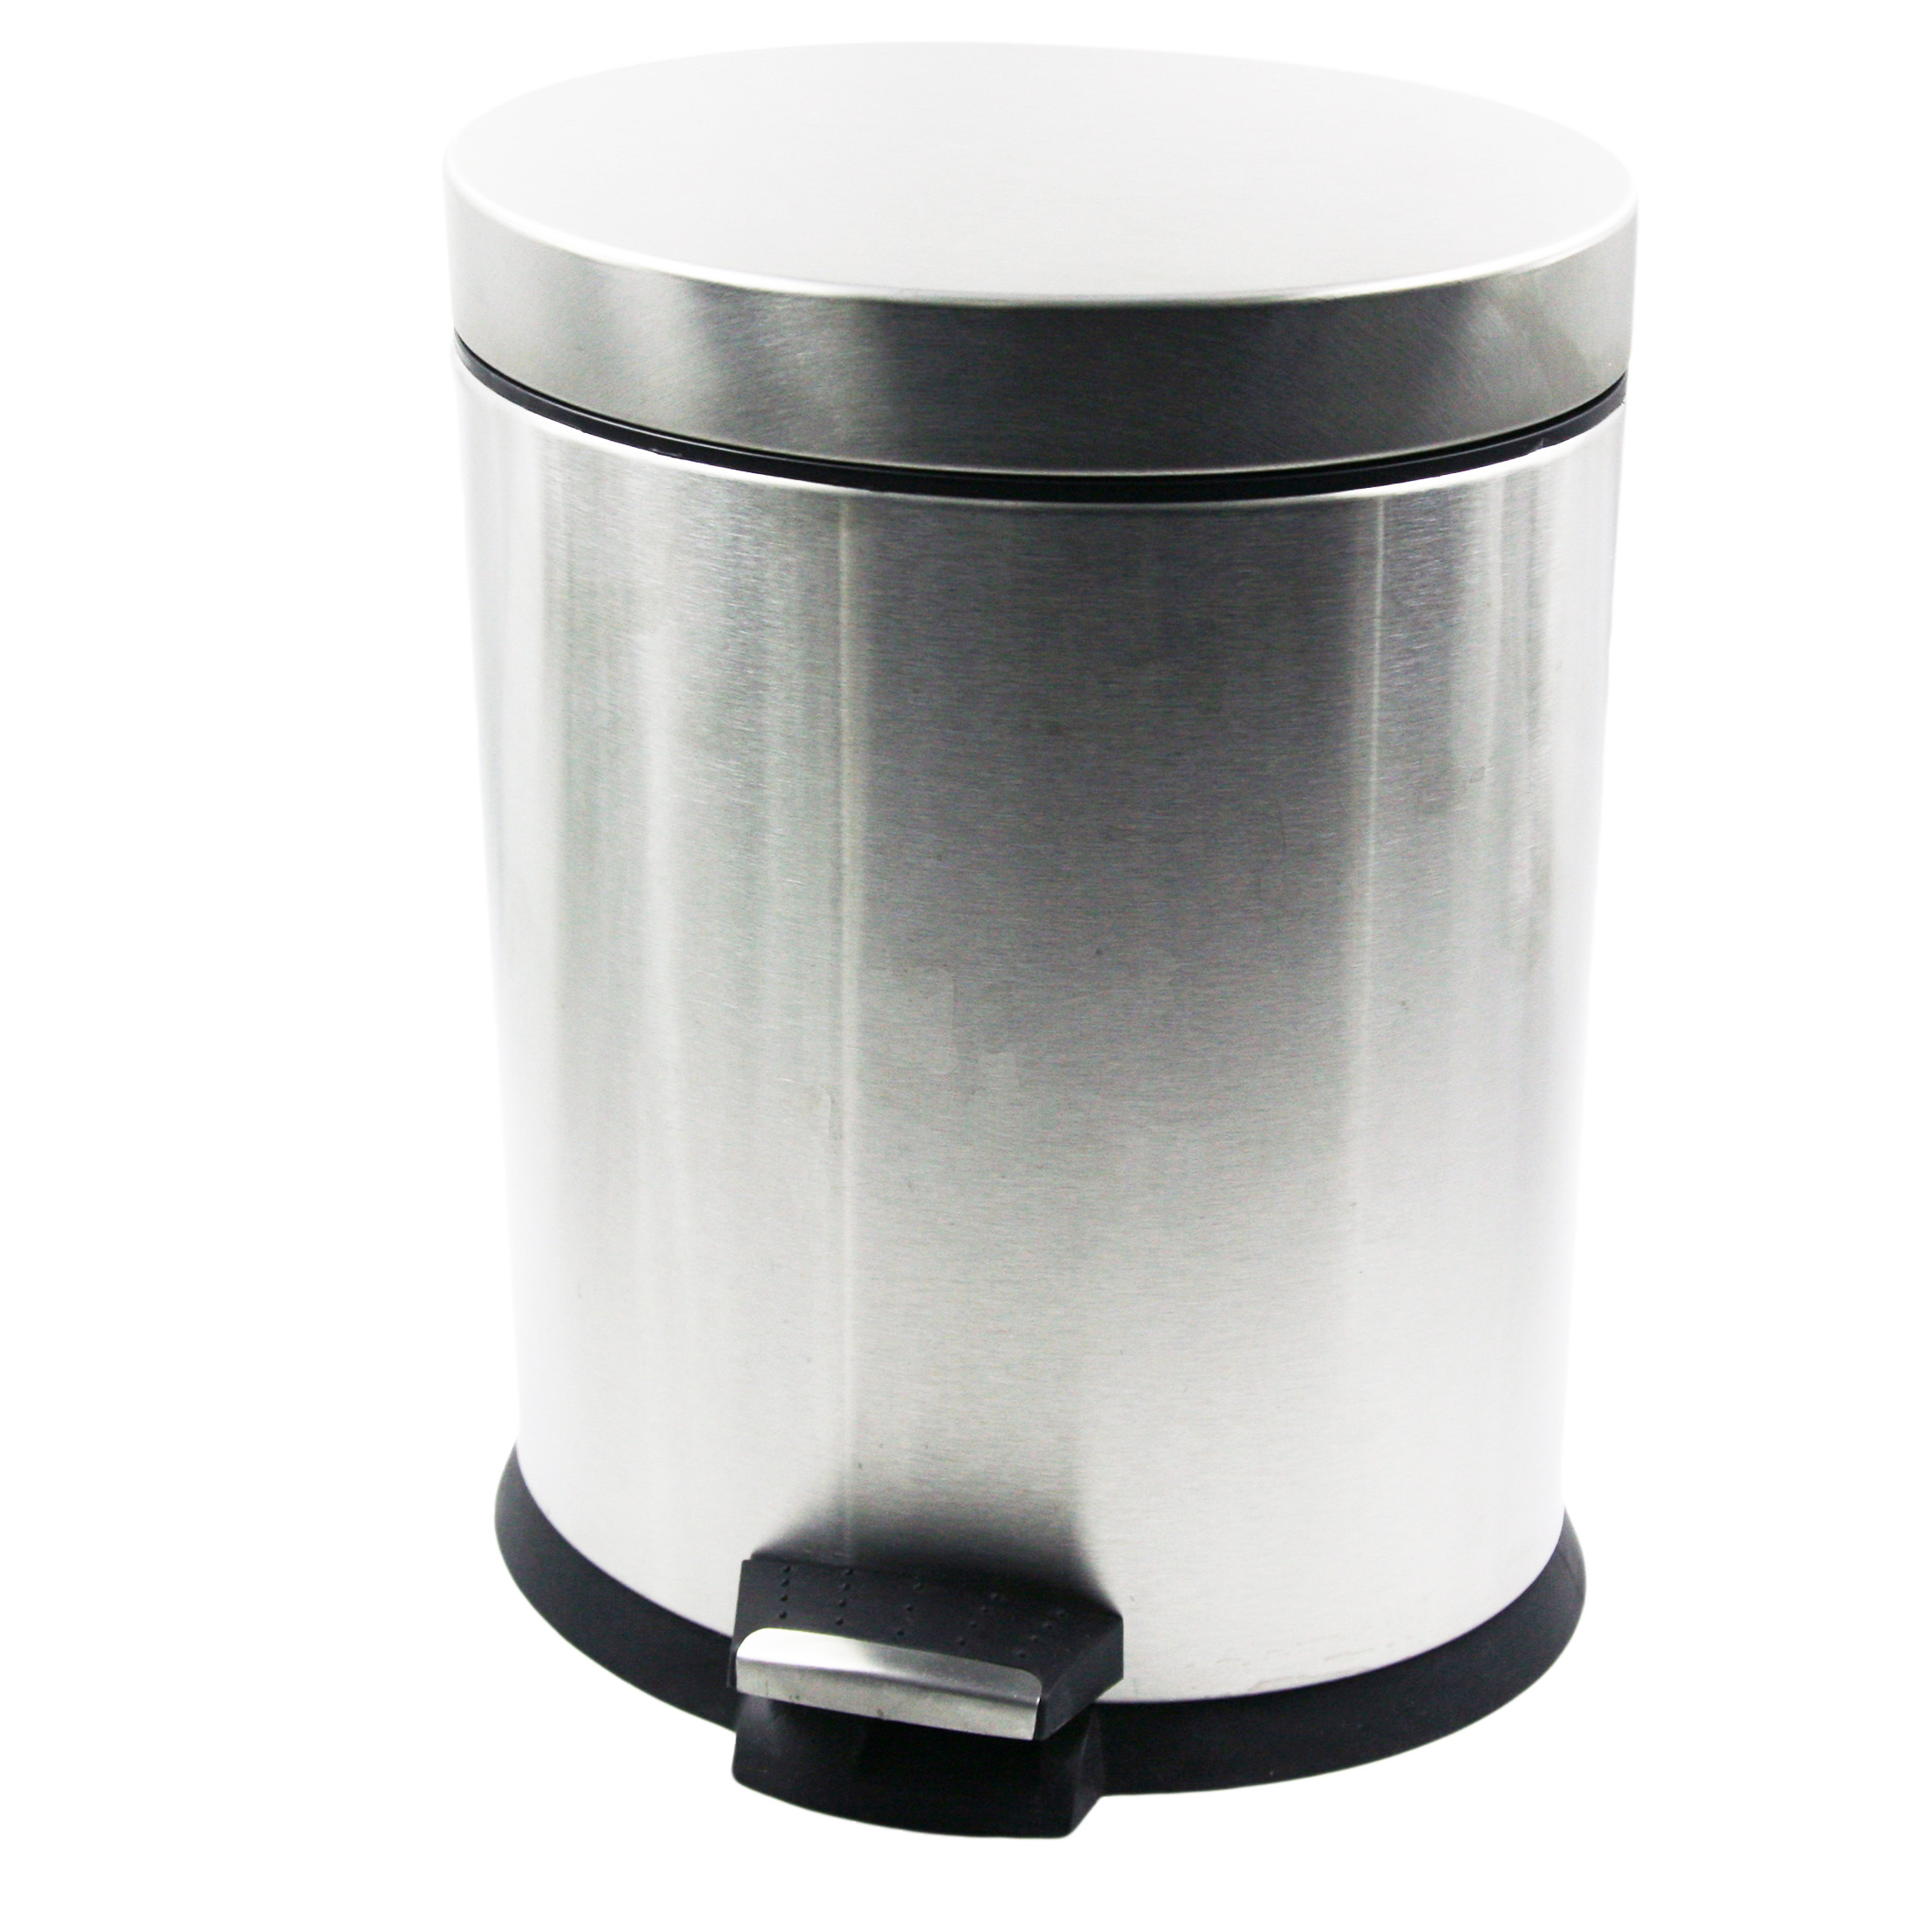 Stainless steel Trash can Oval Waster bin EB-P66